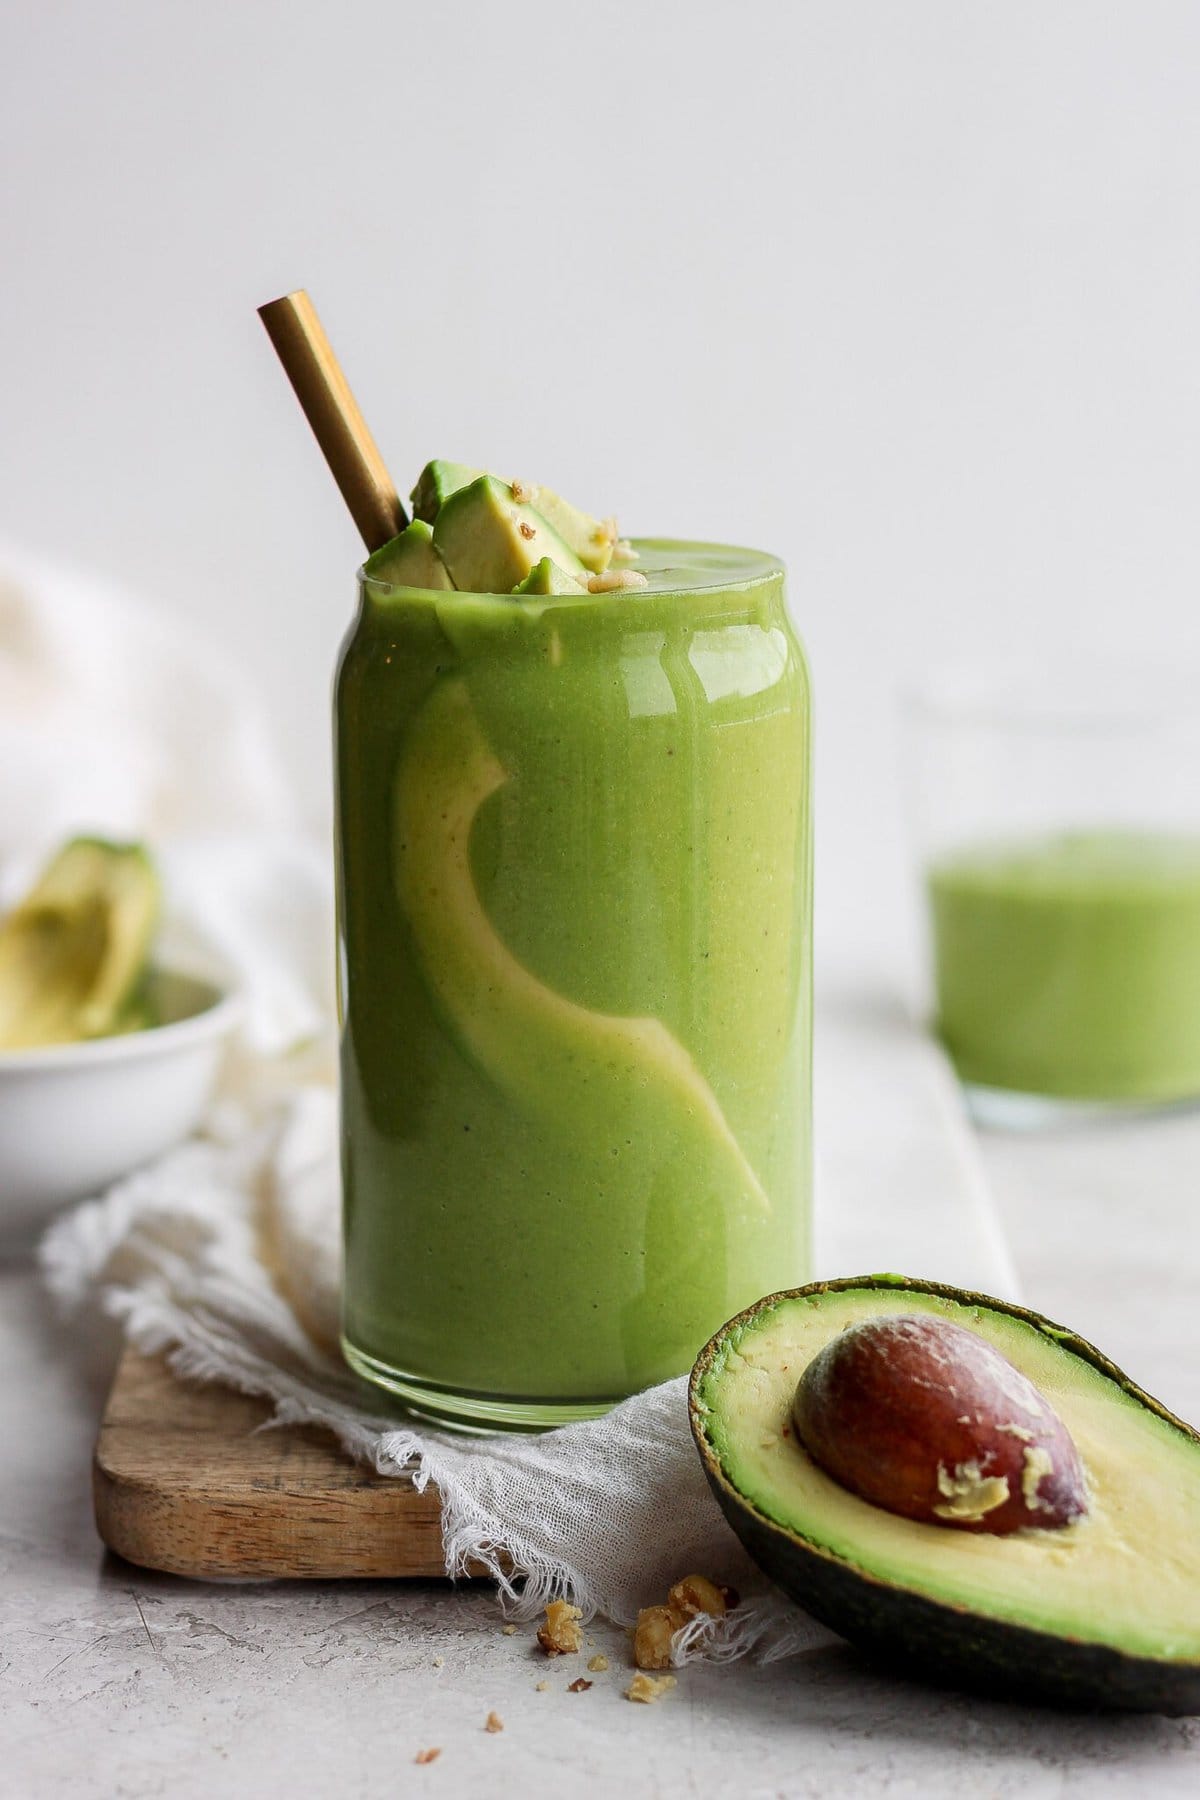 Which Are The Steps To Make Avocado Juice Typical Of Bangli?